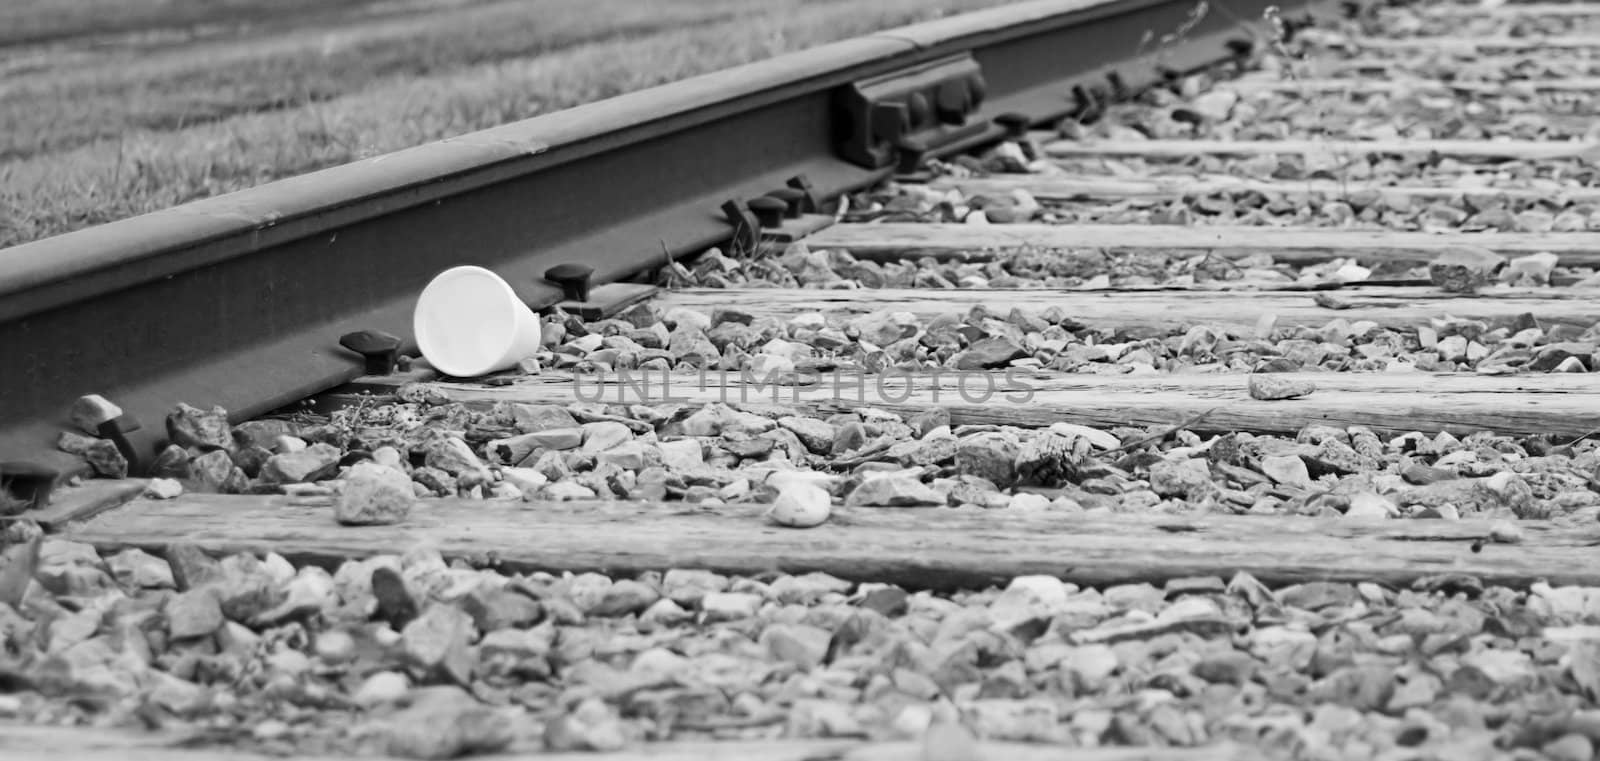 A styrofoam cup laying on some railroad tracks